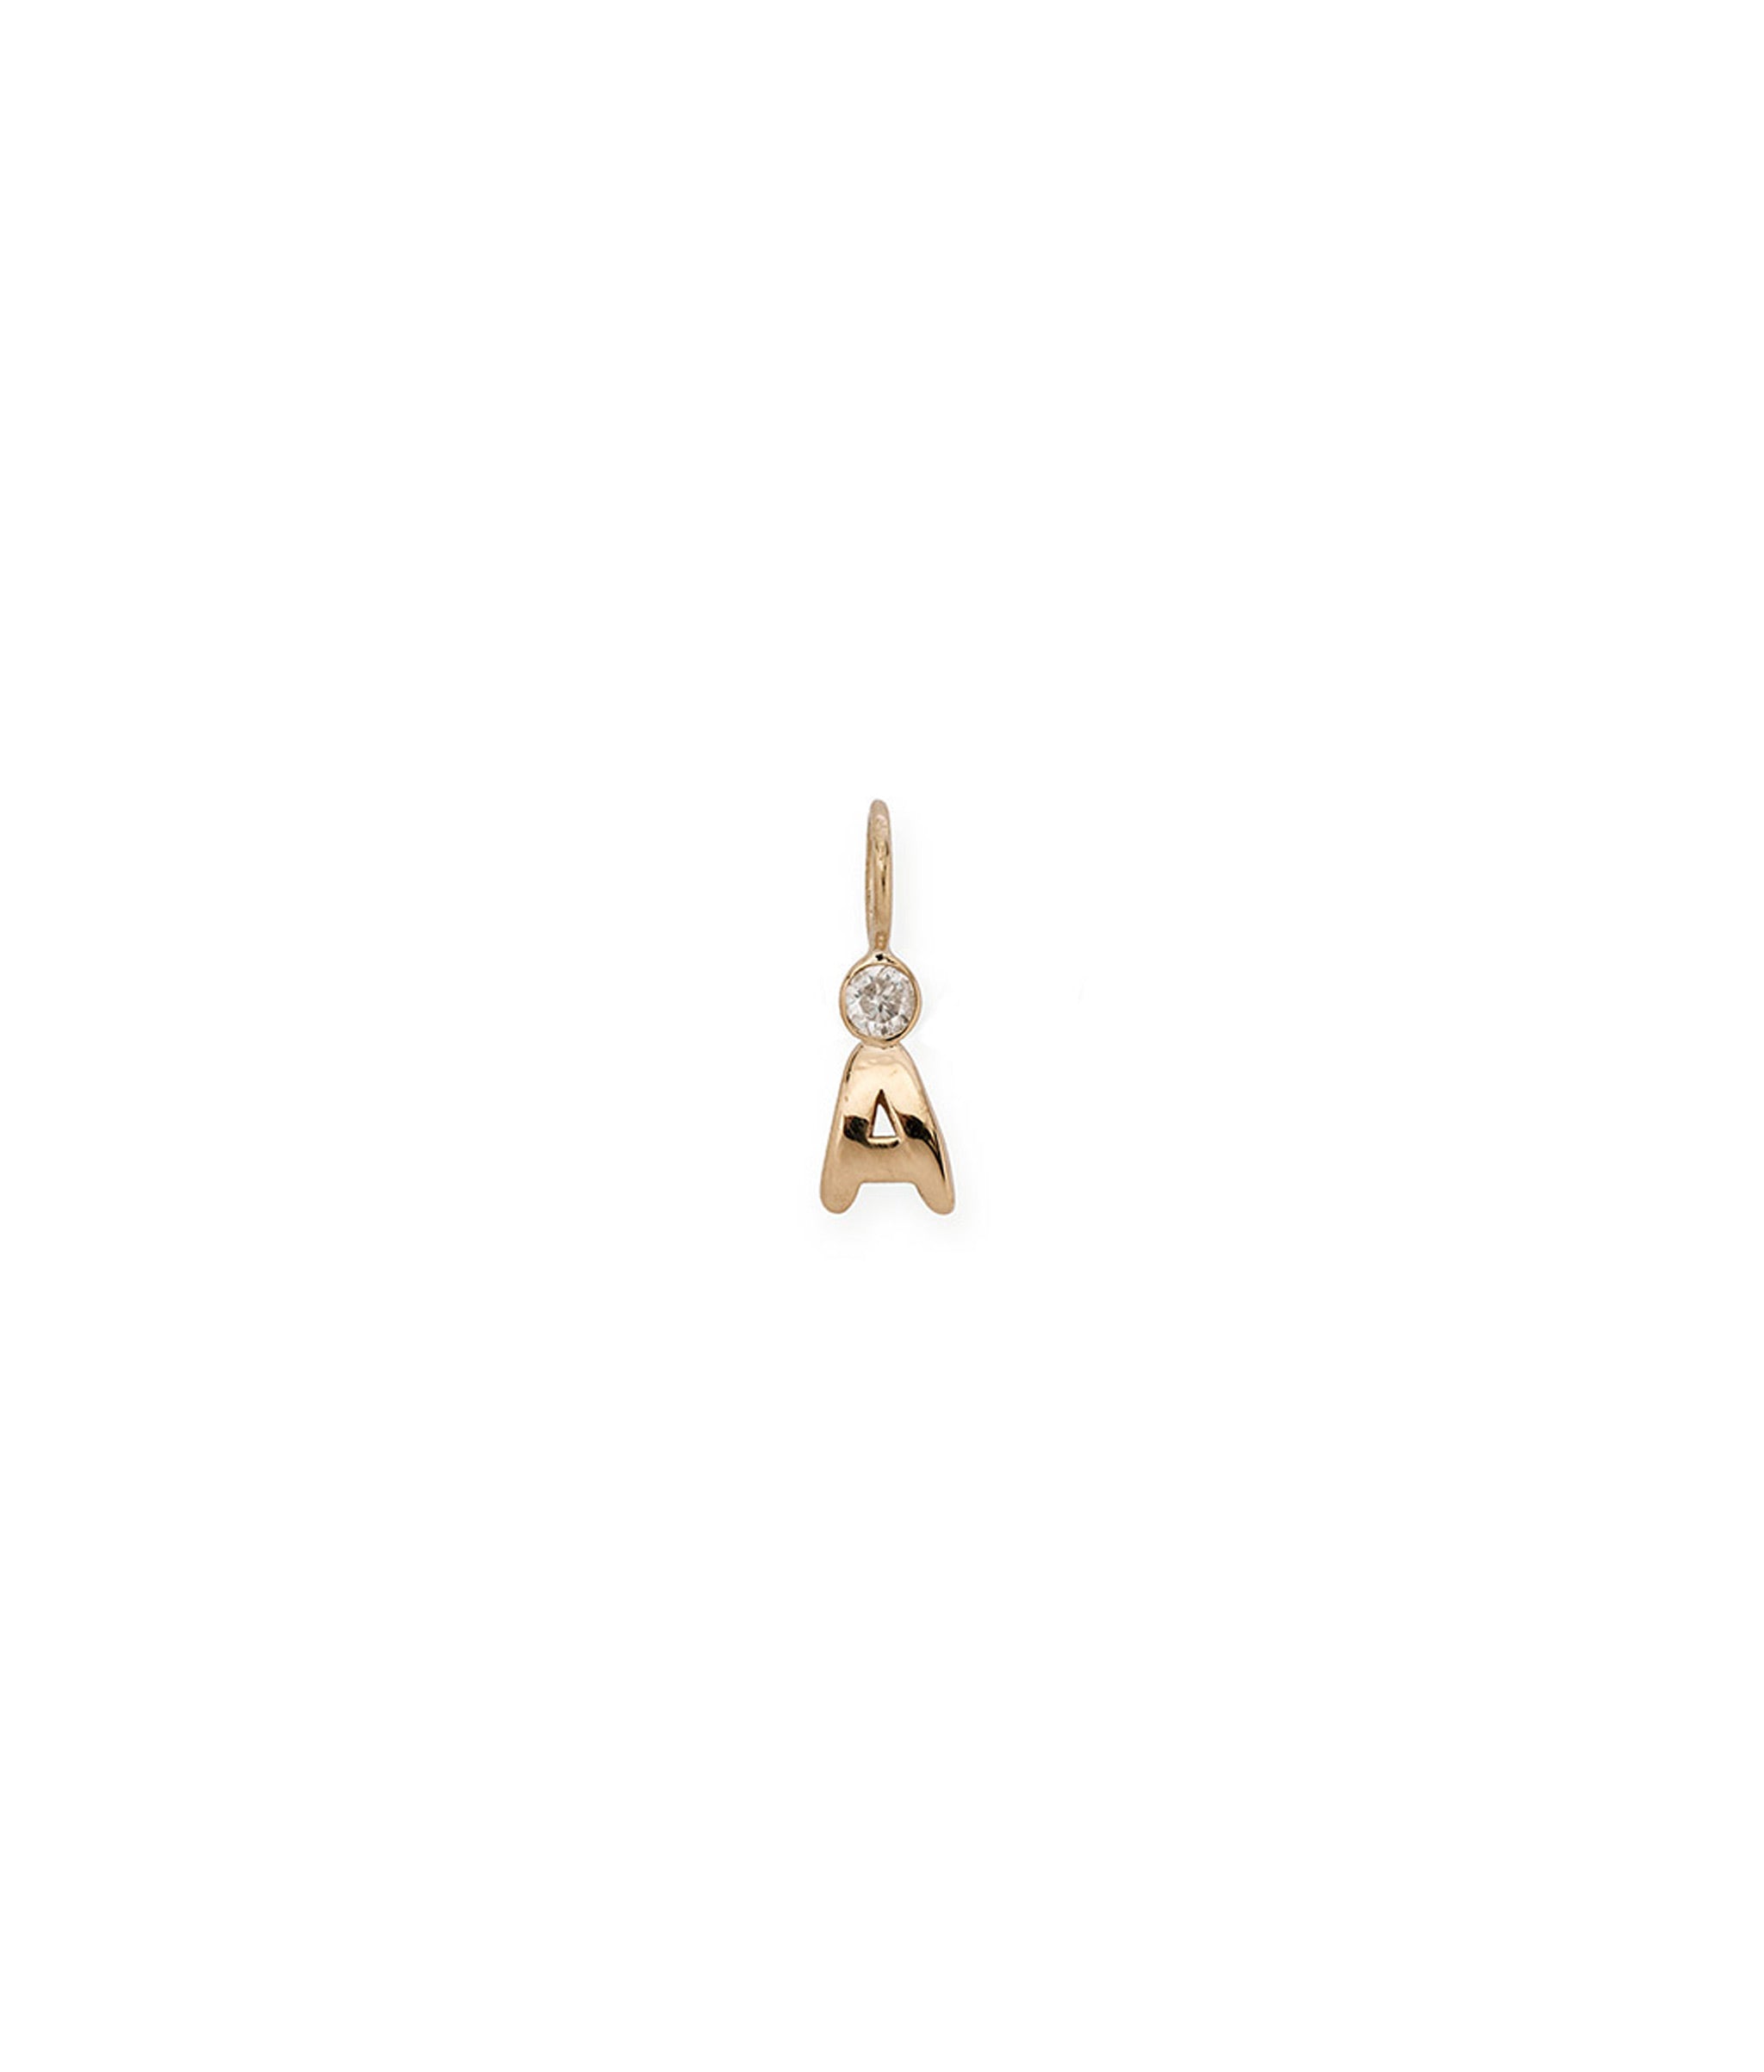 Alphabet Soup "A" Charm. Puffy mini 14k gold letter "A" charm with round diamond accent.